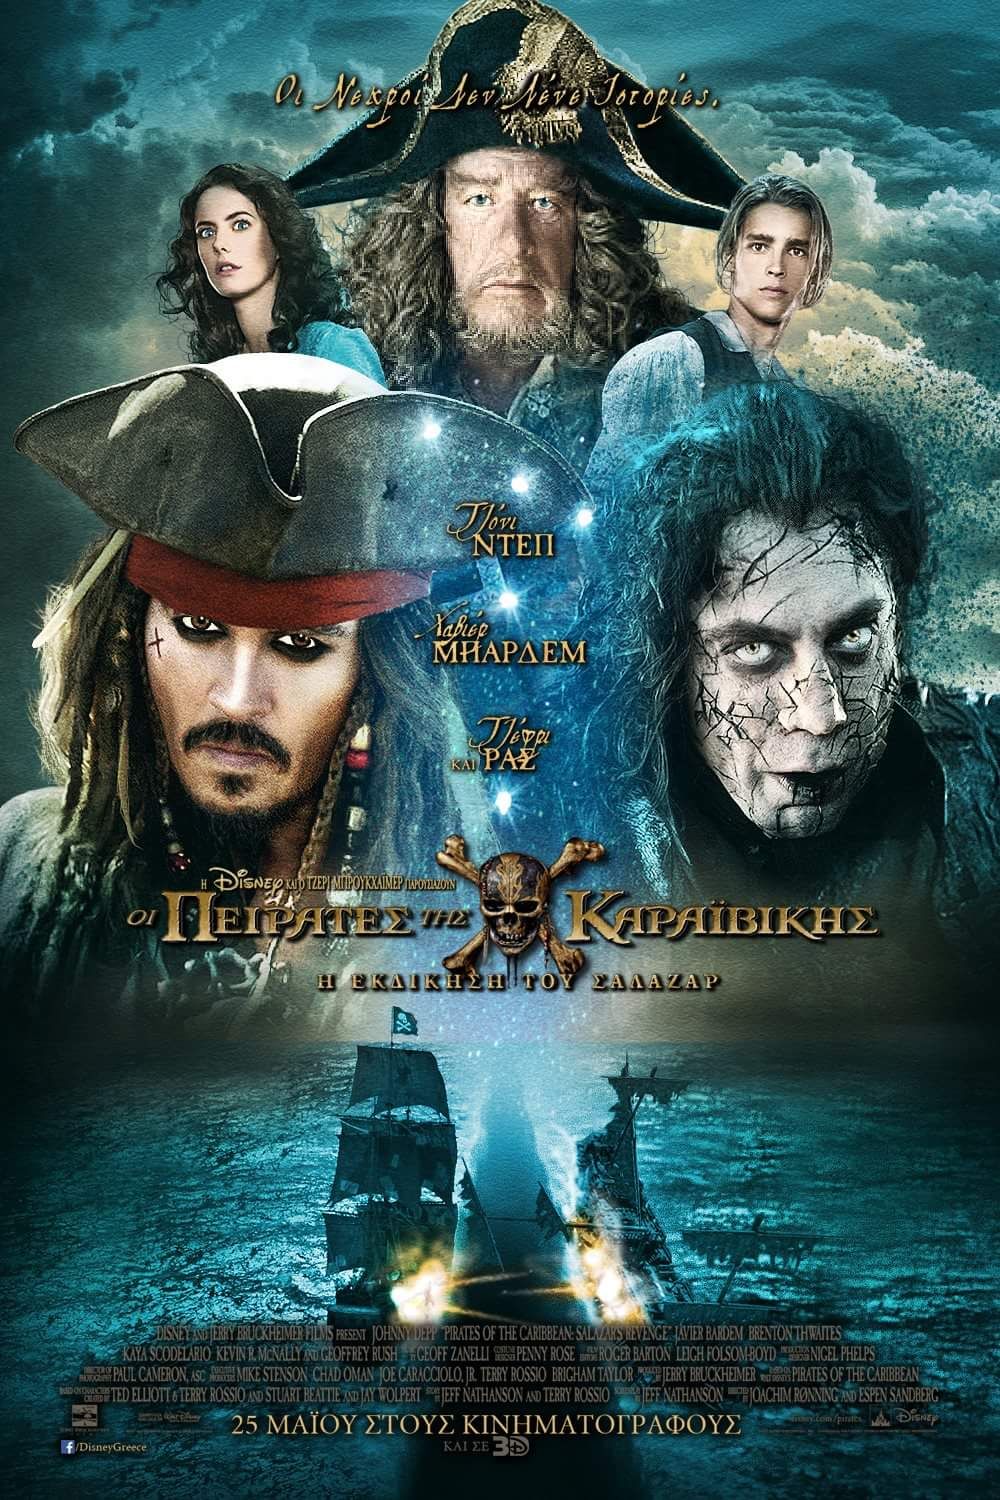 pirates of the caribbean 5 free online movie